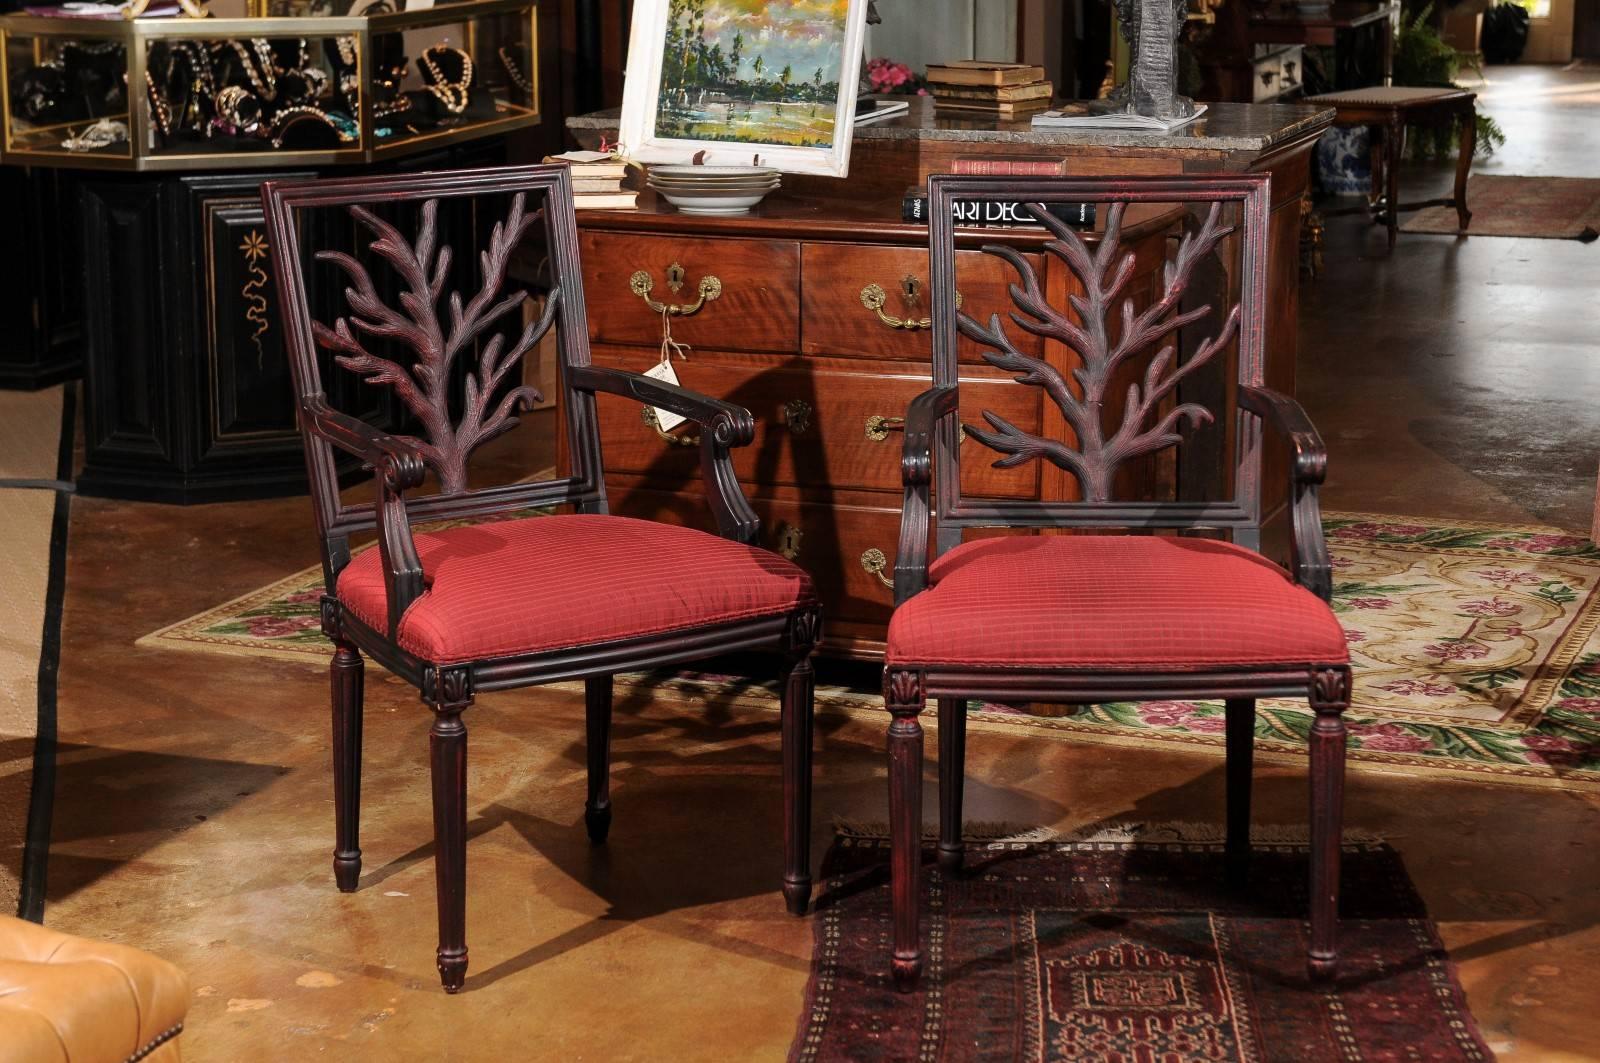 A unique pair of side chairs with a tree branch design. The chair has a slight red undertone on it.